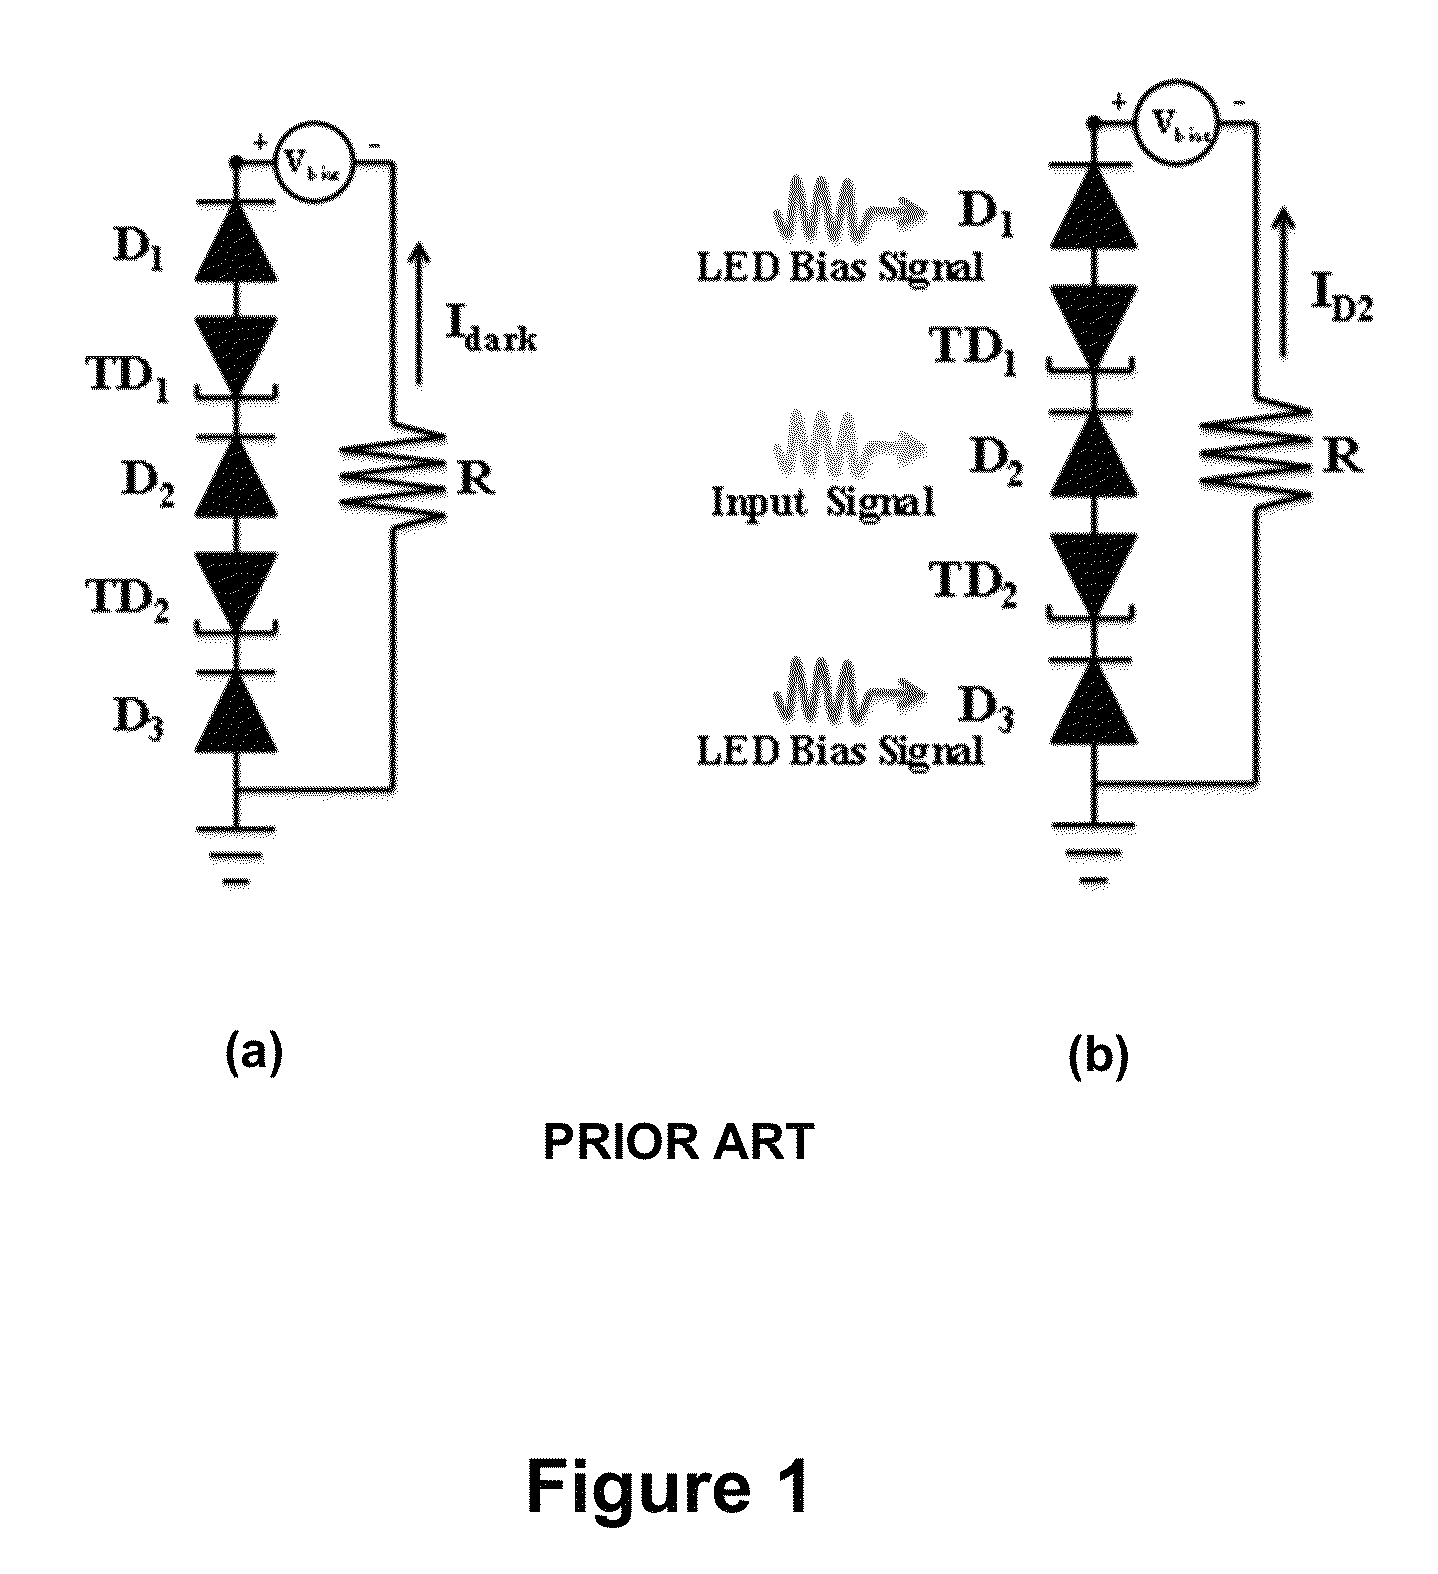 Multiband photodetector utilizing serially connected unipolar and bipolar devices